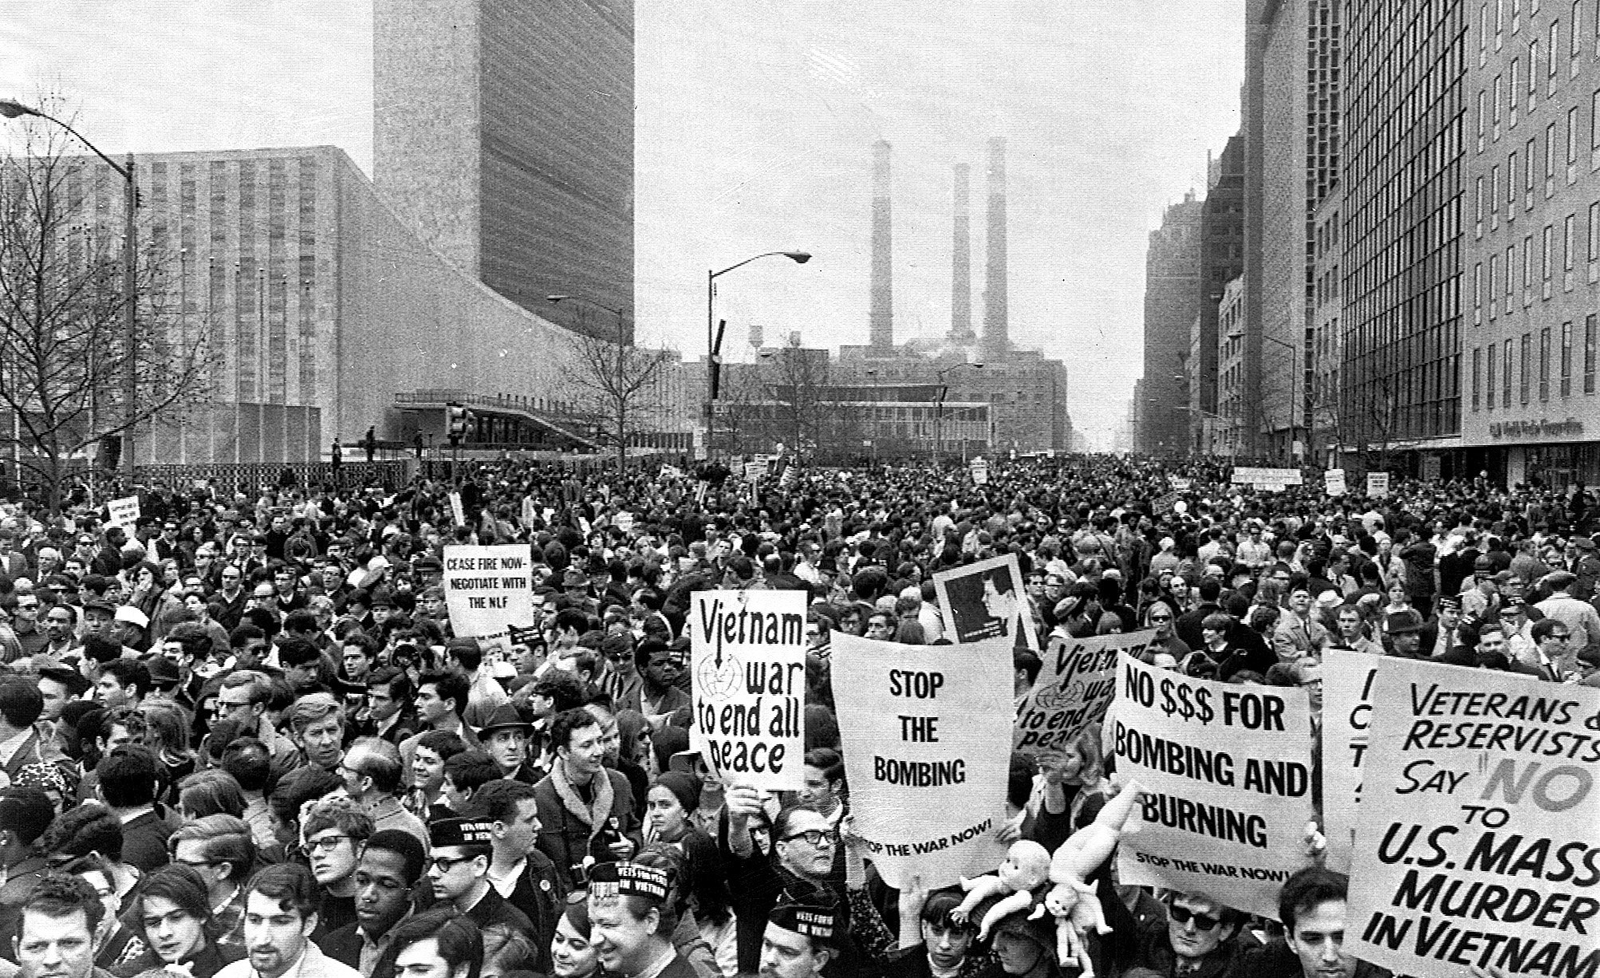 A 1967 photograph of an anti-Vietnam War demonstration at the United Nations Plaza in New York.